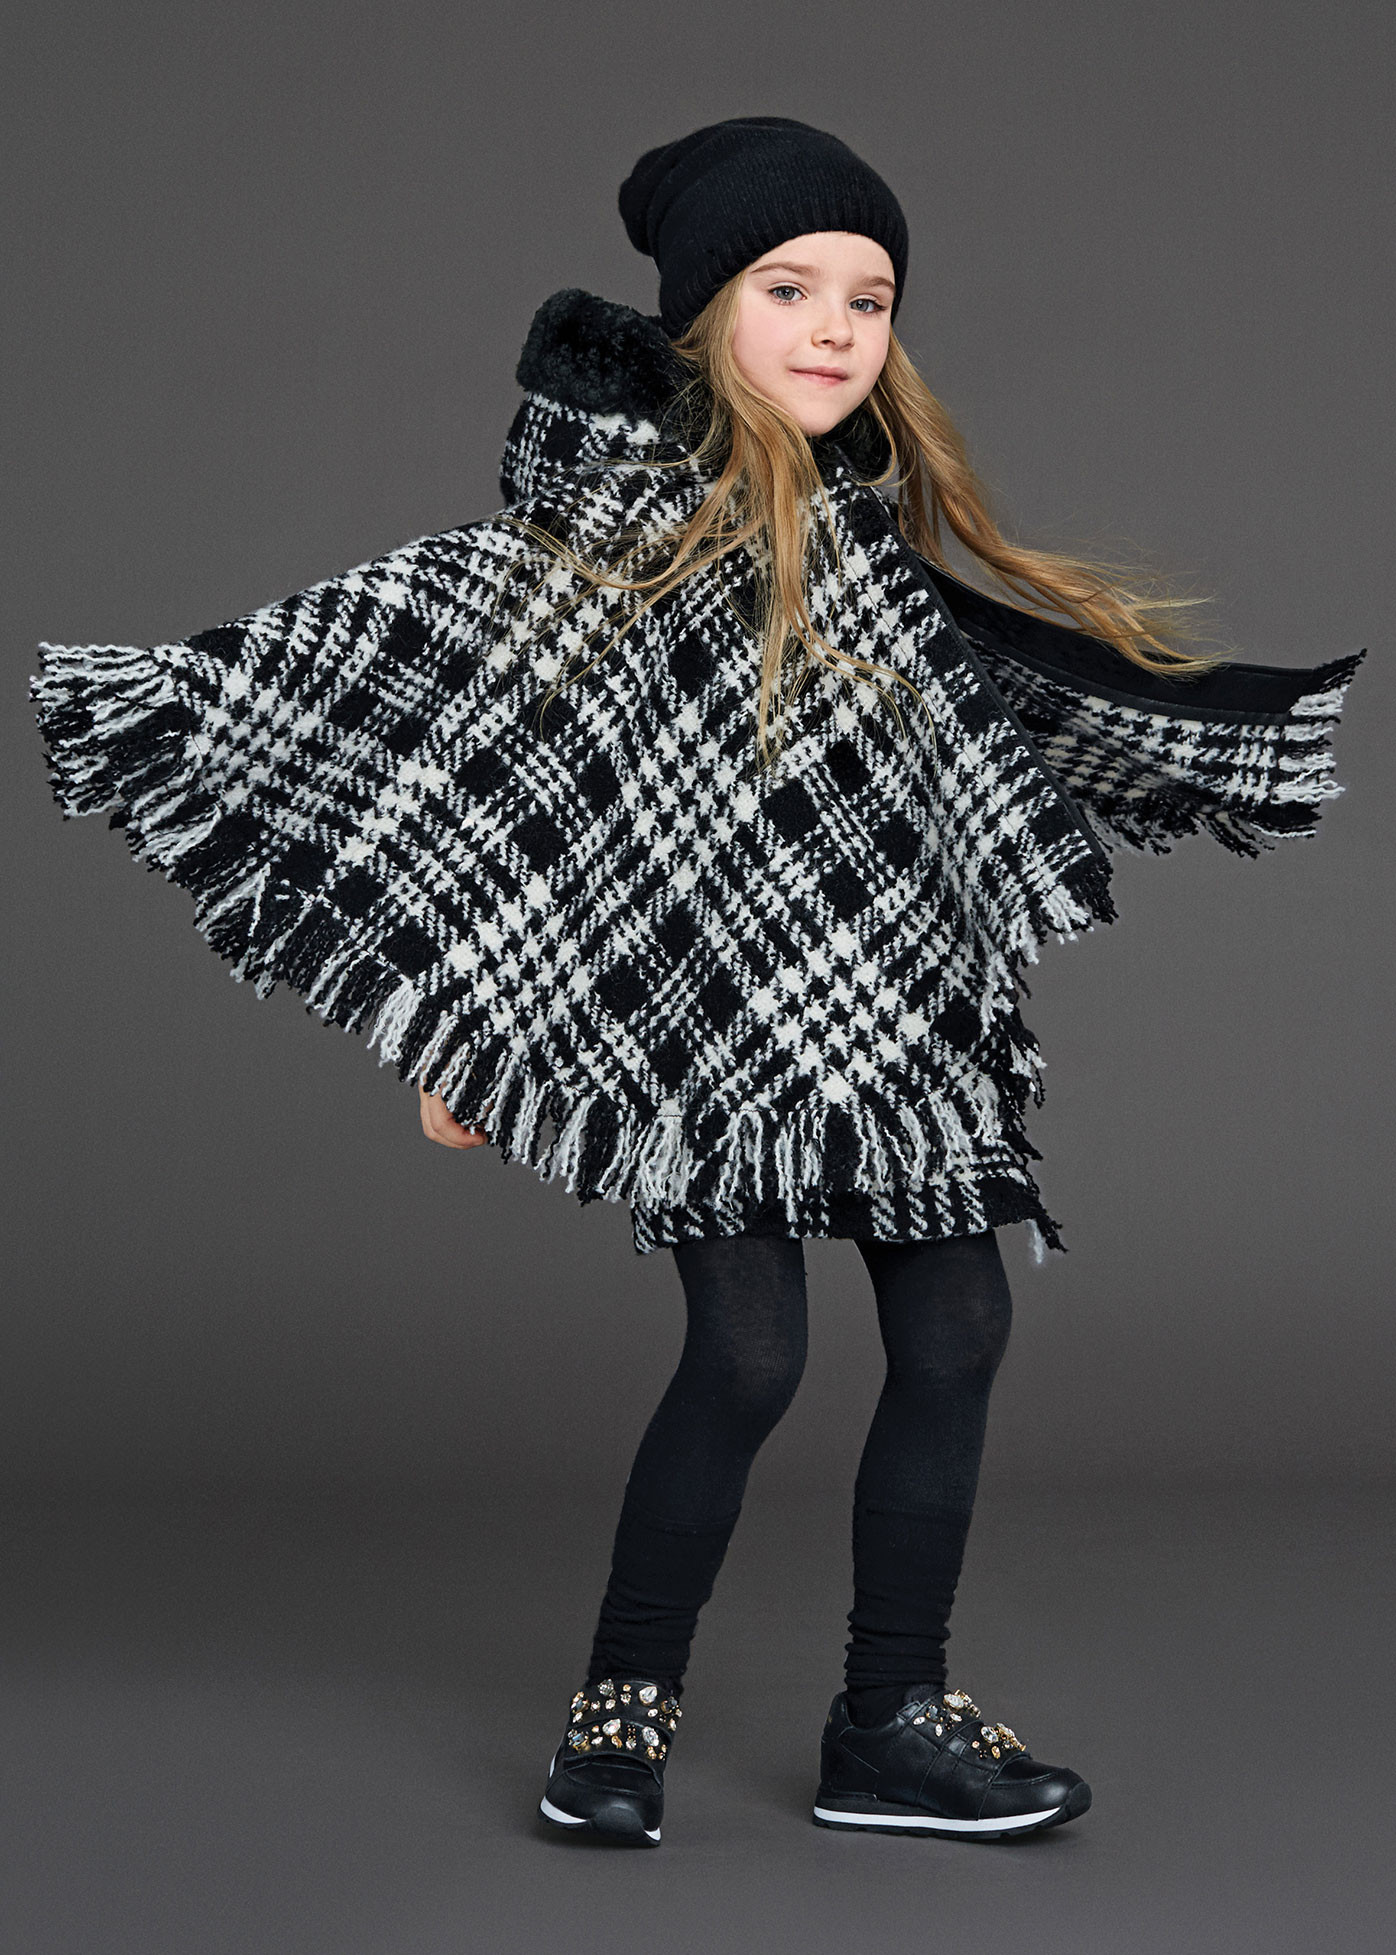 Fashion Clothing For Kids
 Girls Dolce & Gabbana Winter 2016 Collection